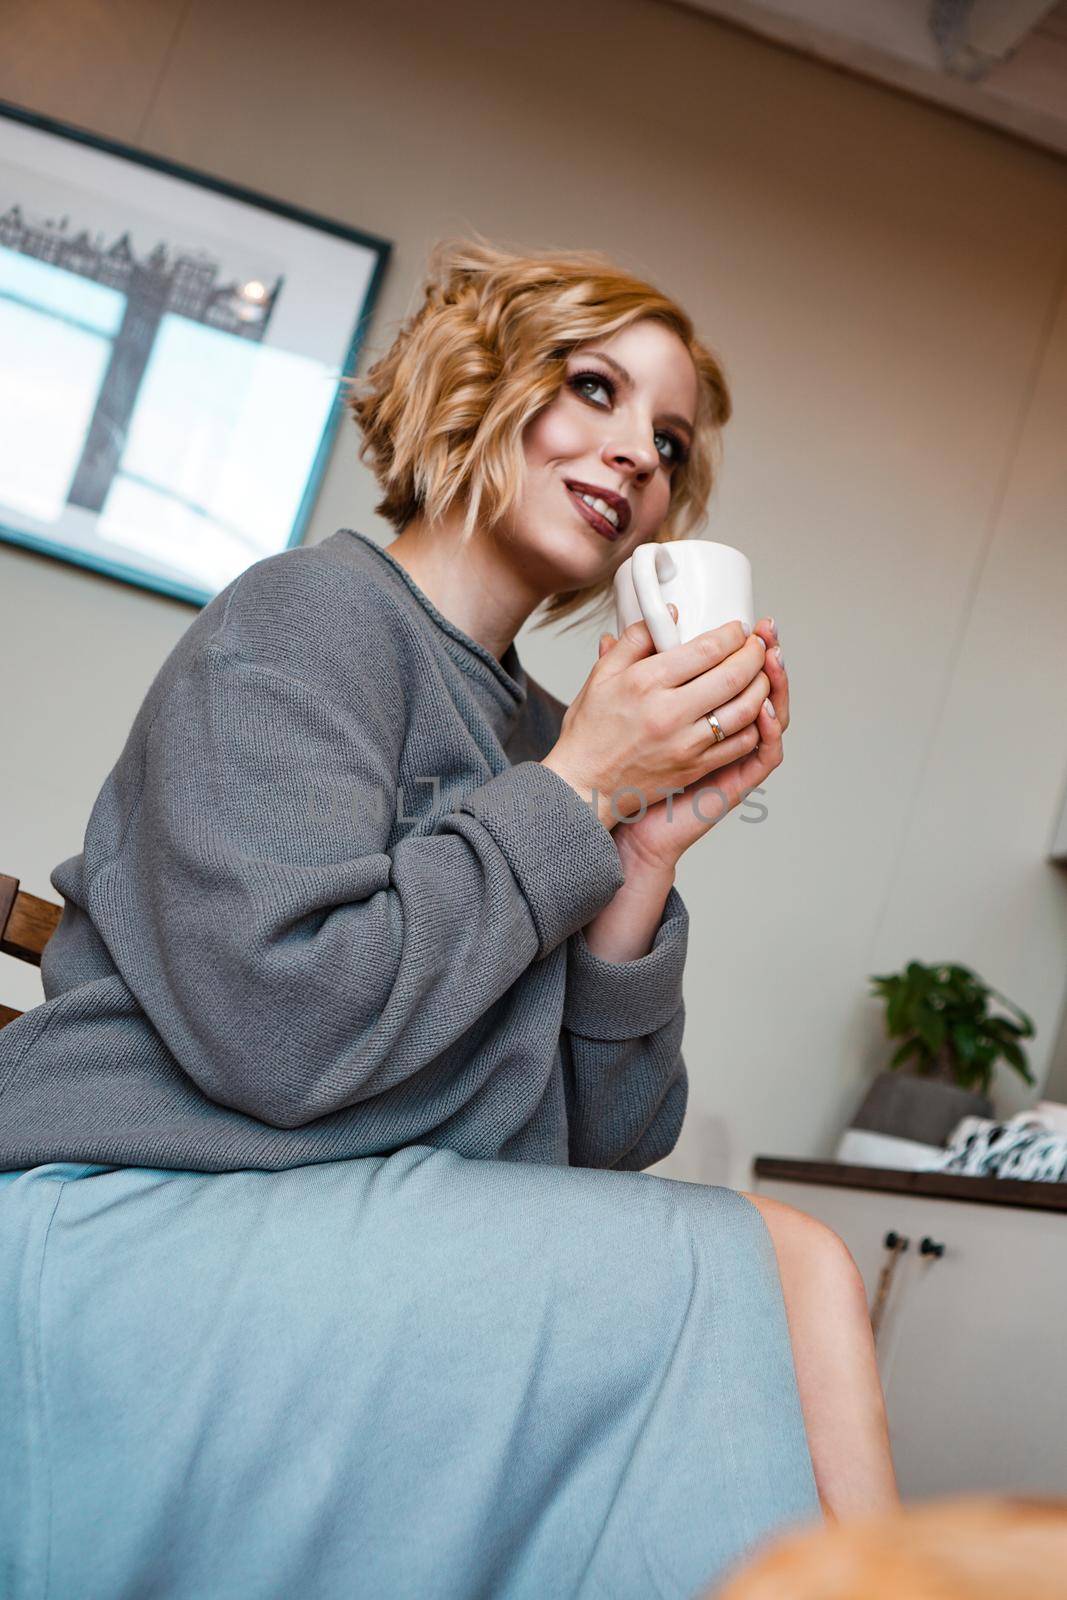 Smiling blonde drinking cappuccino, holding coffee cup. Vertical photo. Stay at home, cozy kitchen